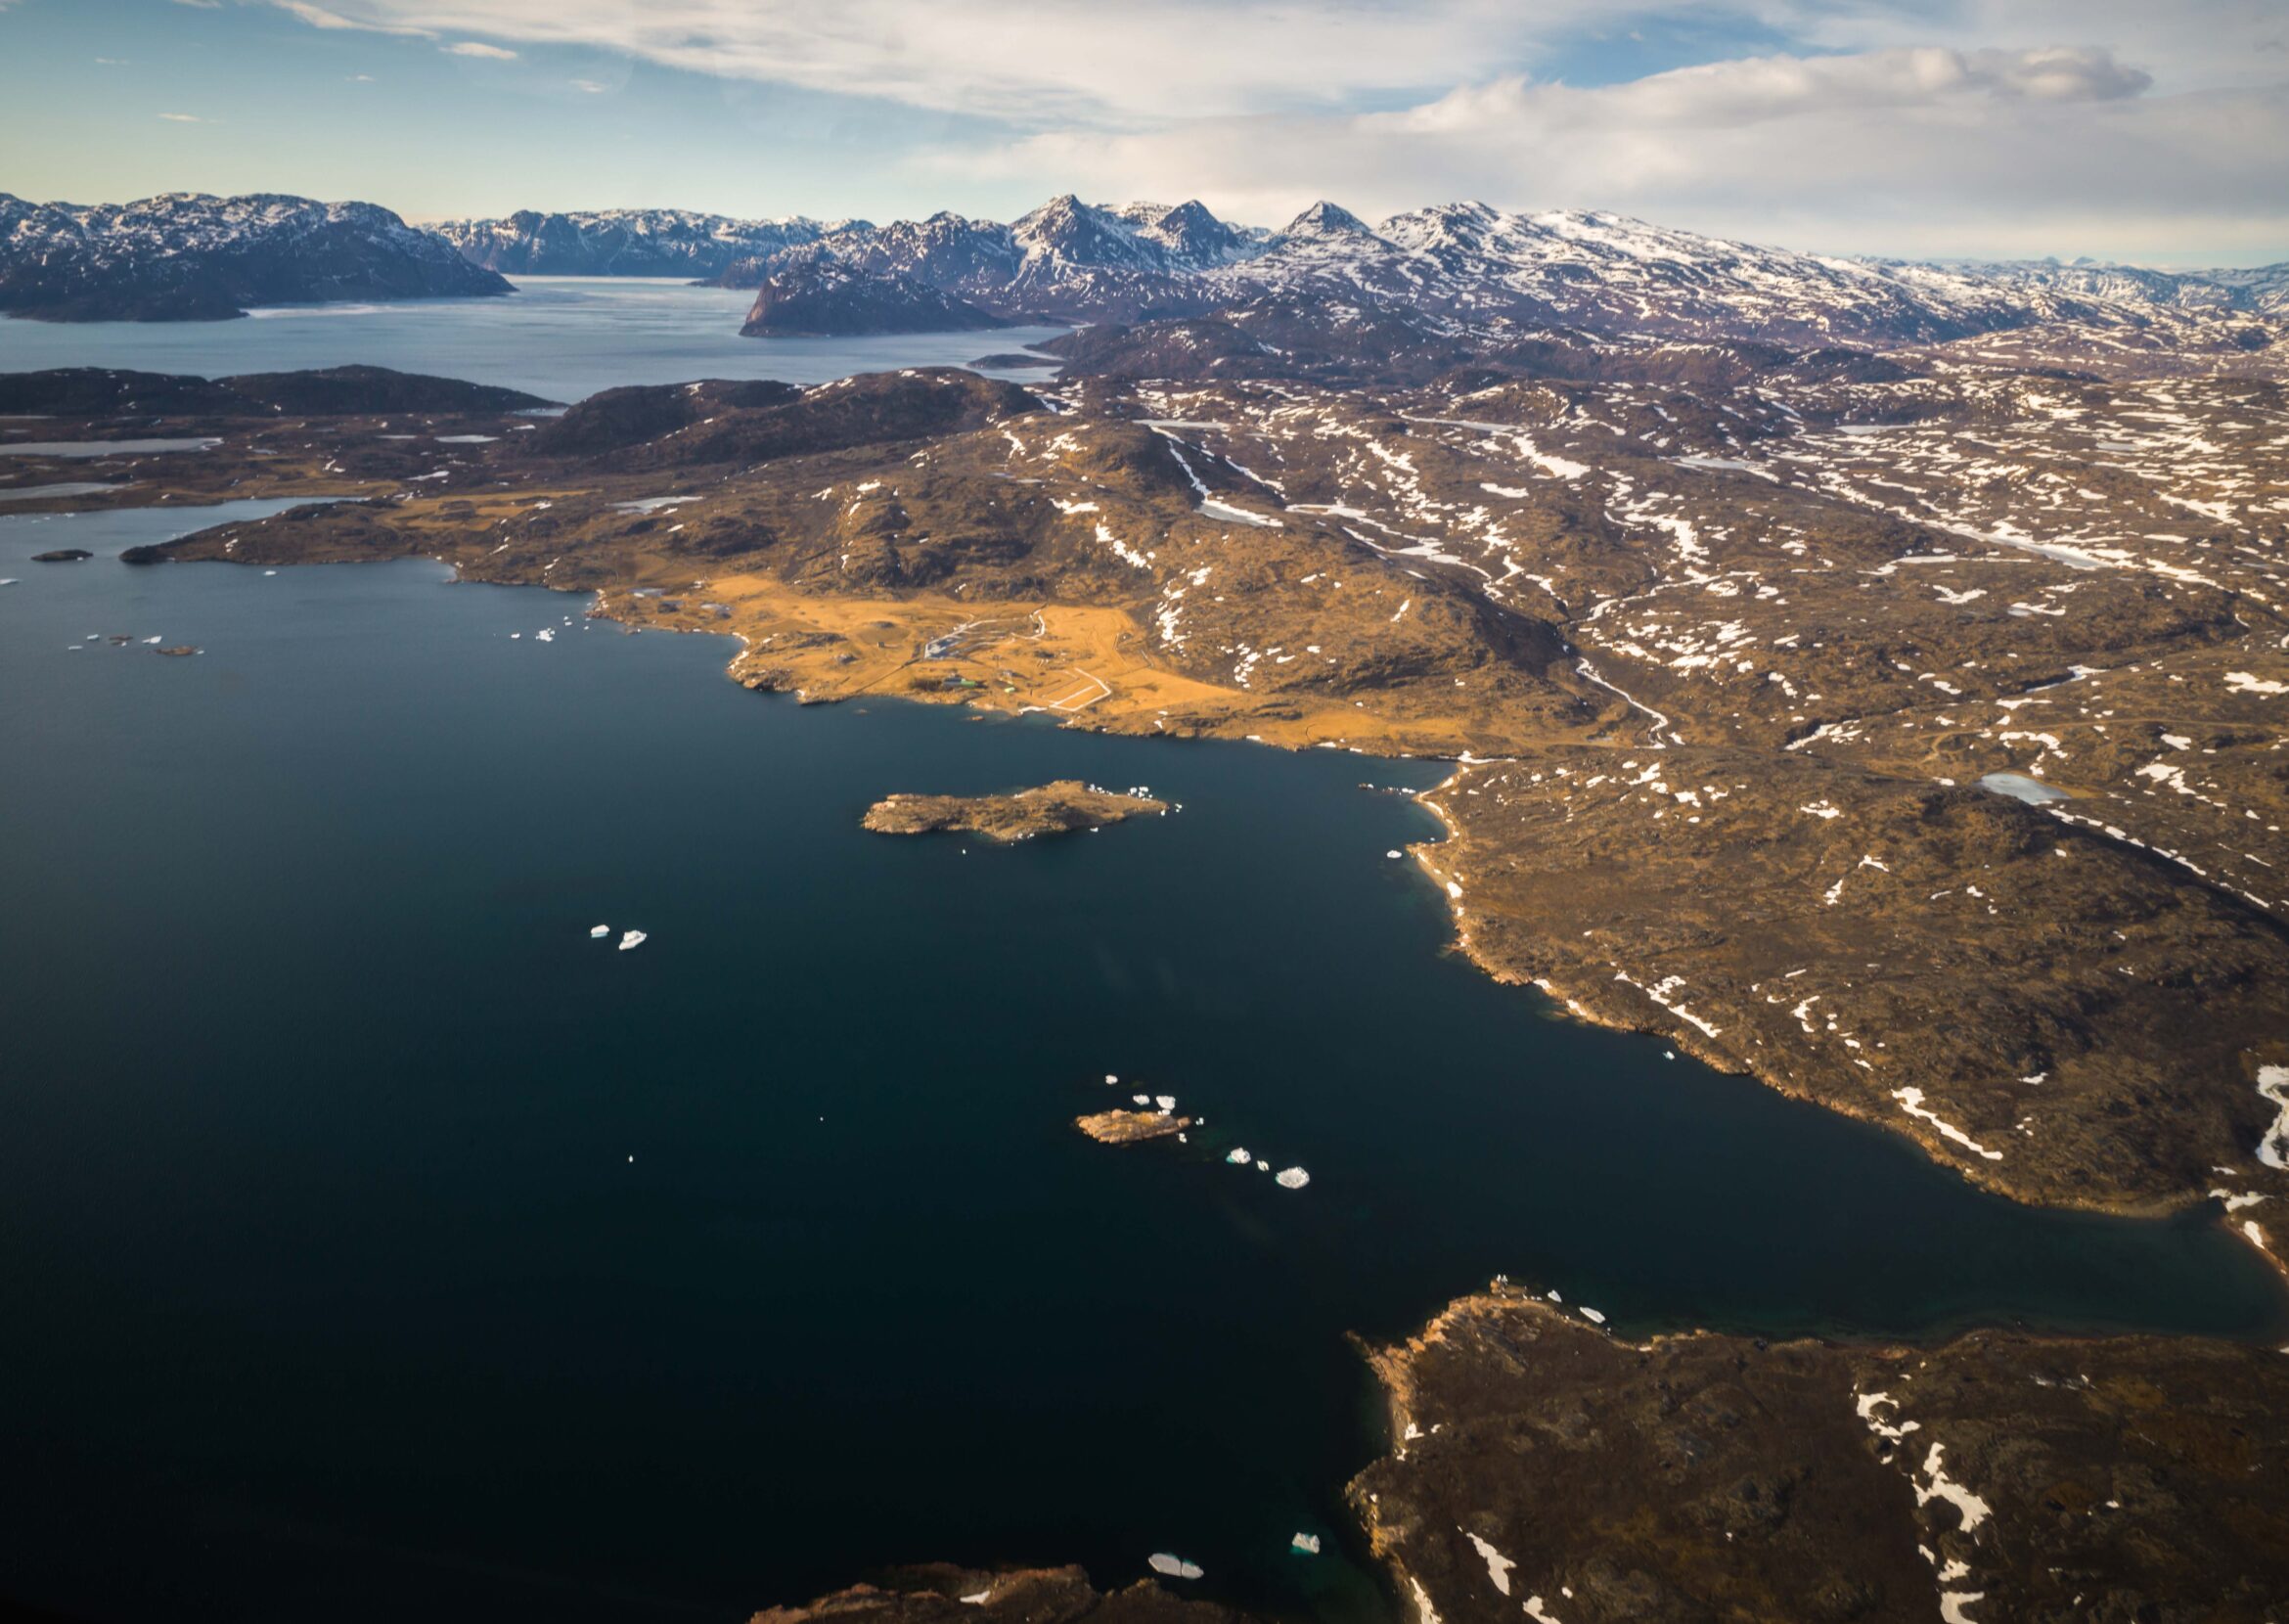 Amber mountains rise from the blue waters of a fjord. Patches of snow dot the land.